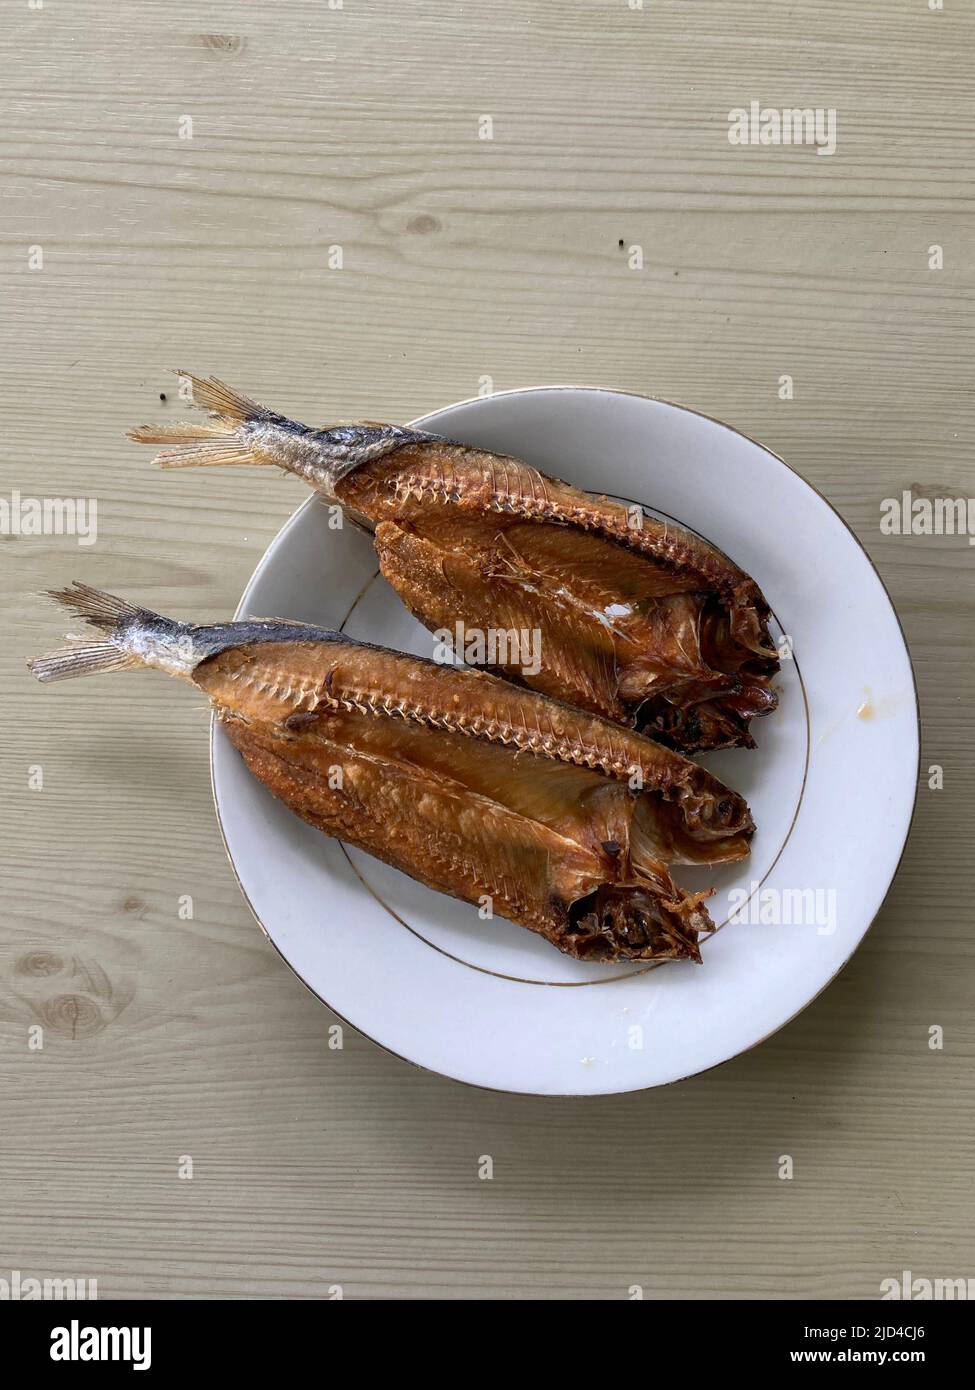 Photo of bangsi dried fish isdang lawin tuyo or cypselurus poecilopterus, yellow-wing flying fish served on a plate which is a native Filipino dish to Stock Photo